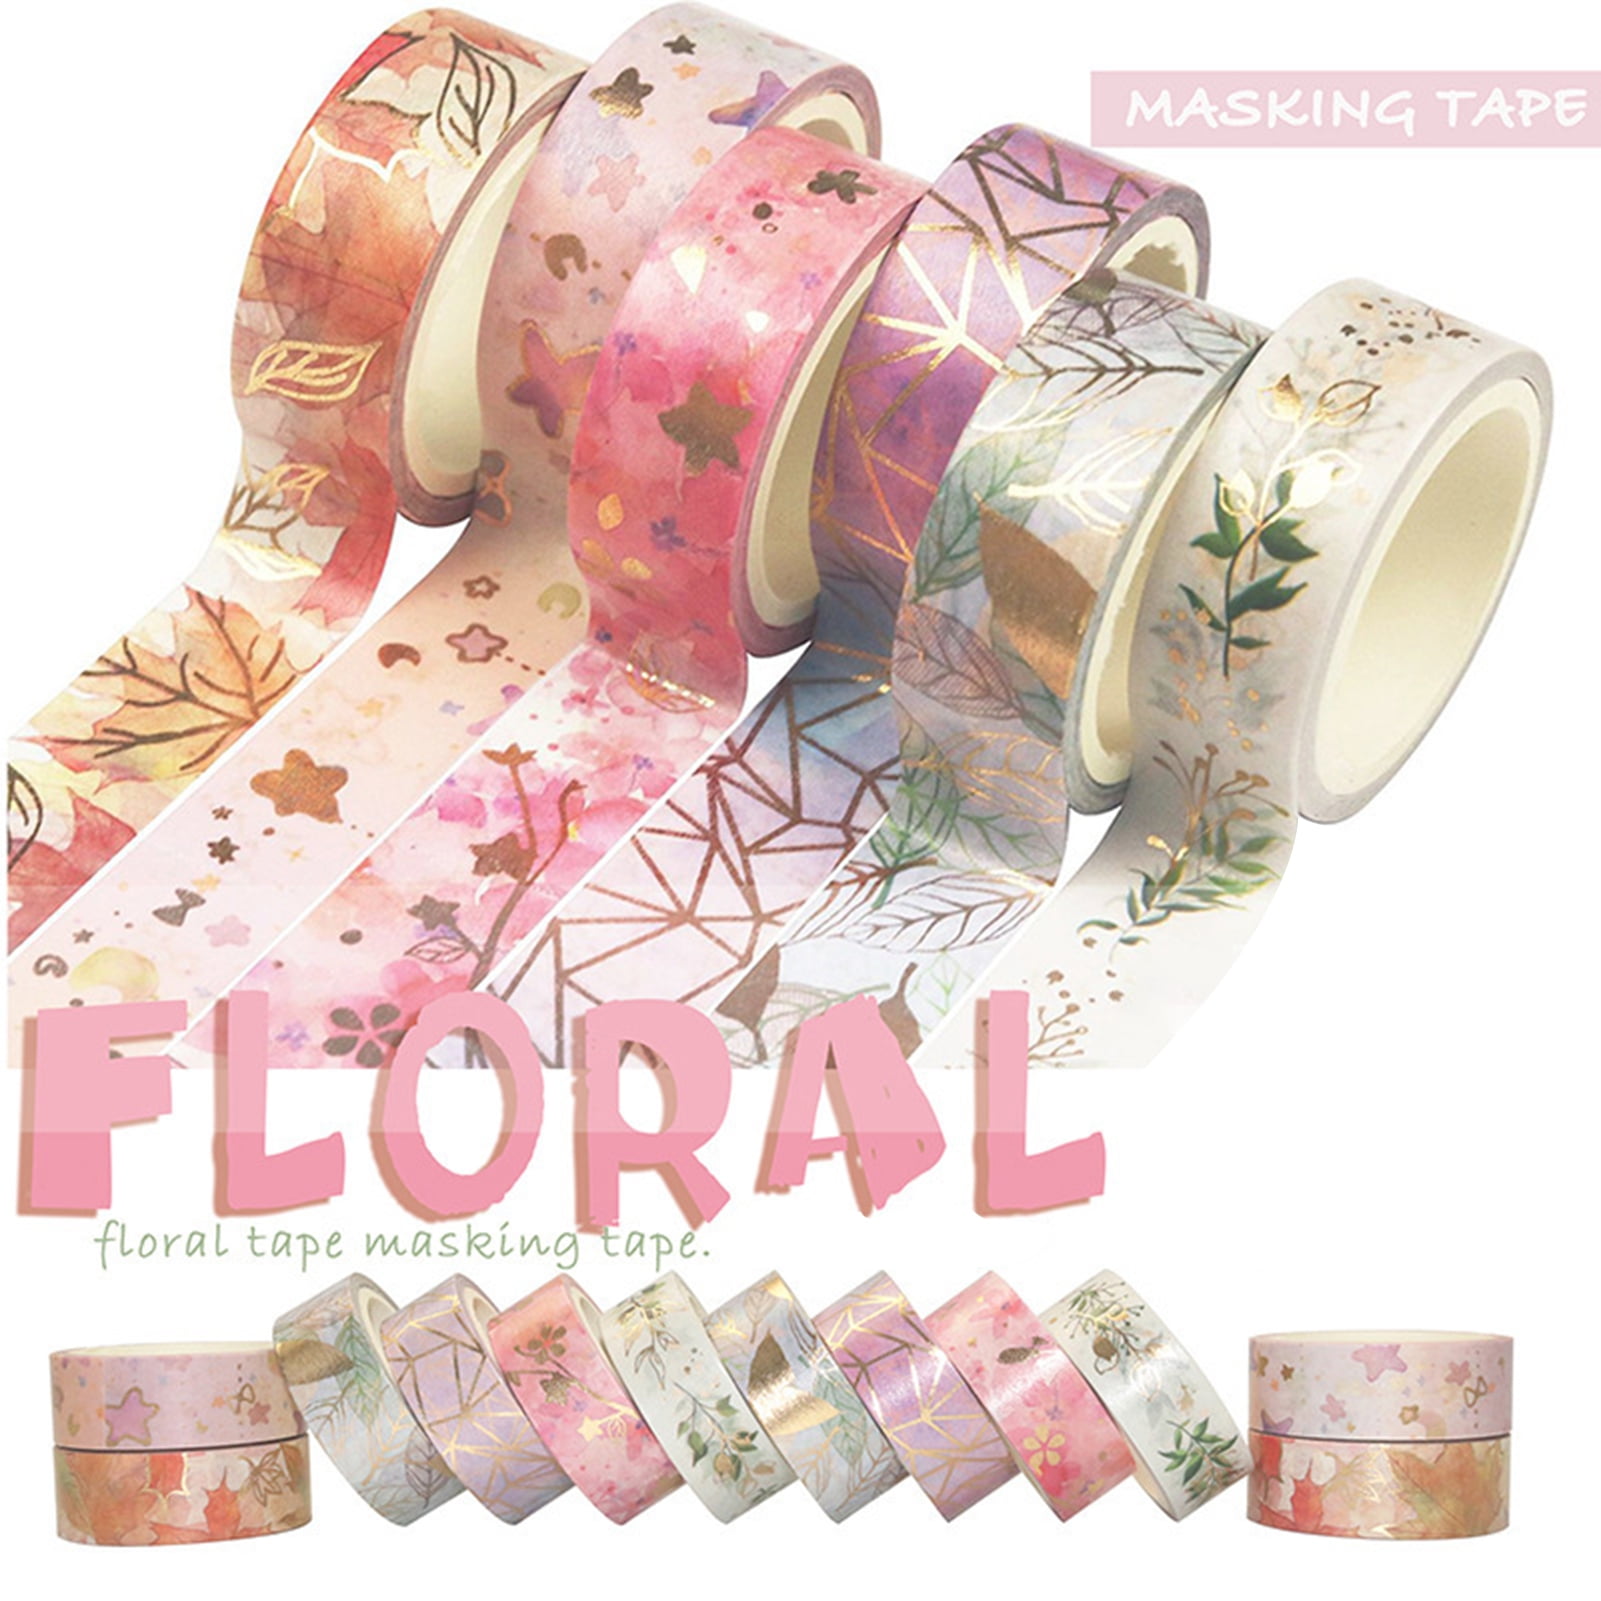 Holiday Washi Tape - Pink Girls - Gold Foil – Shop Rongrong